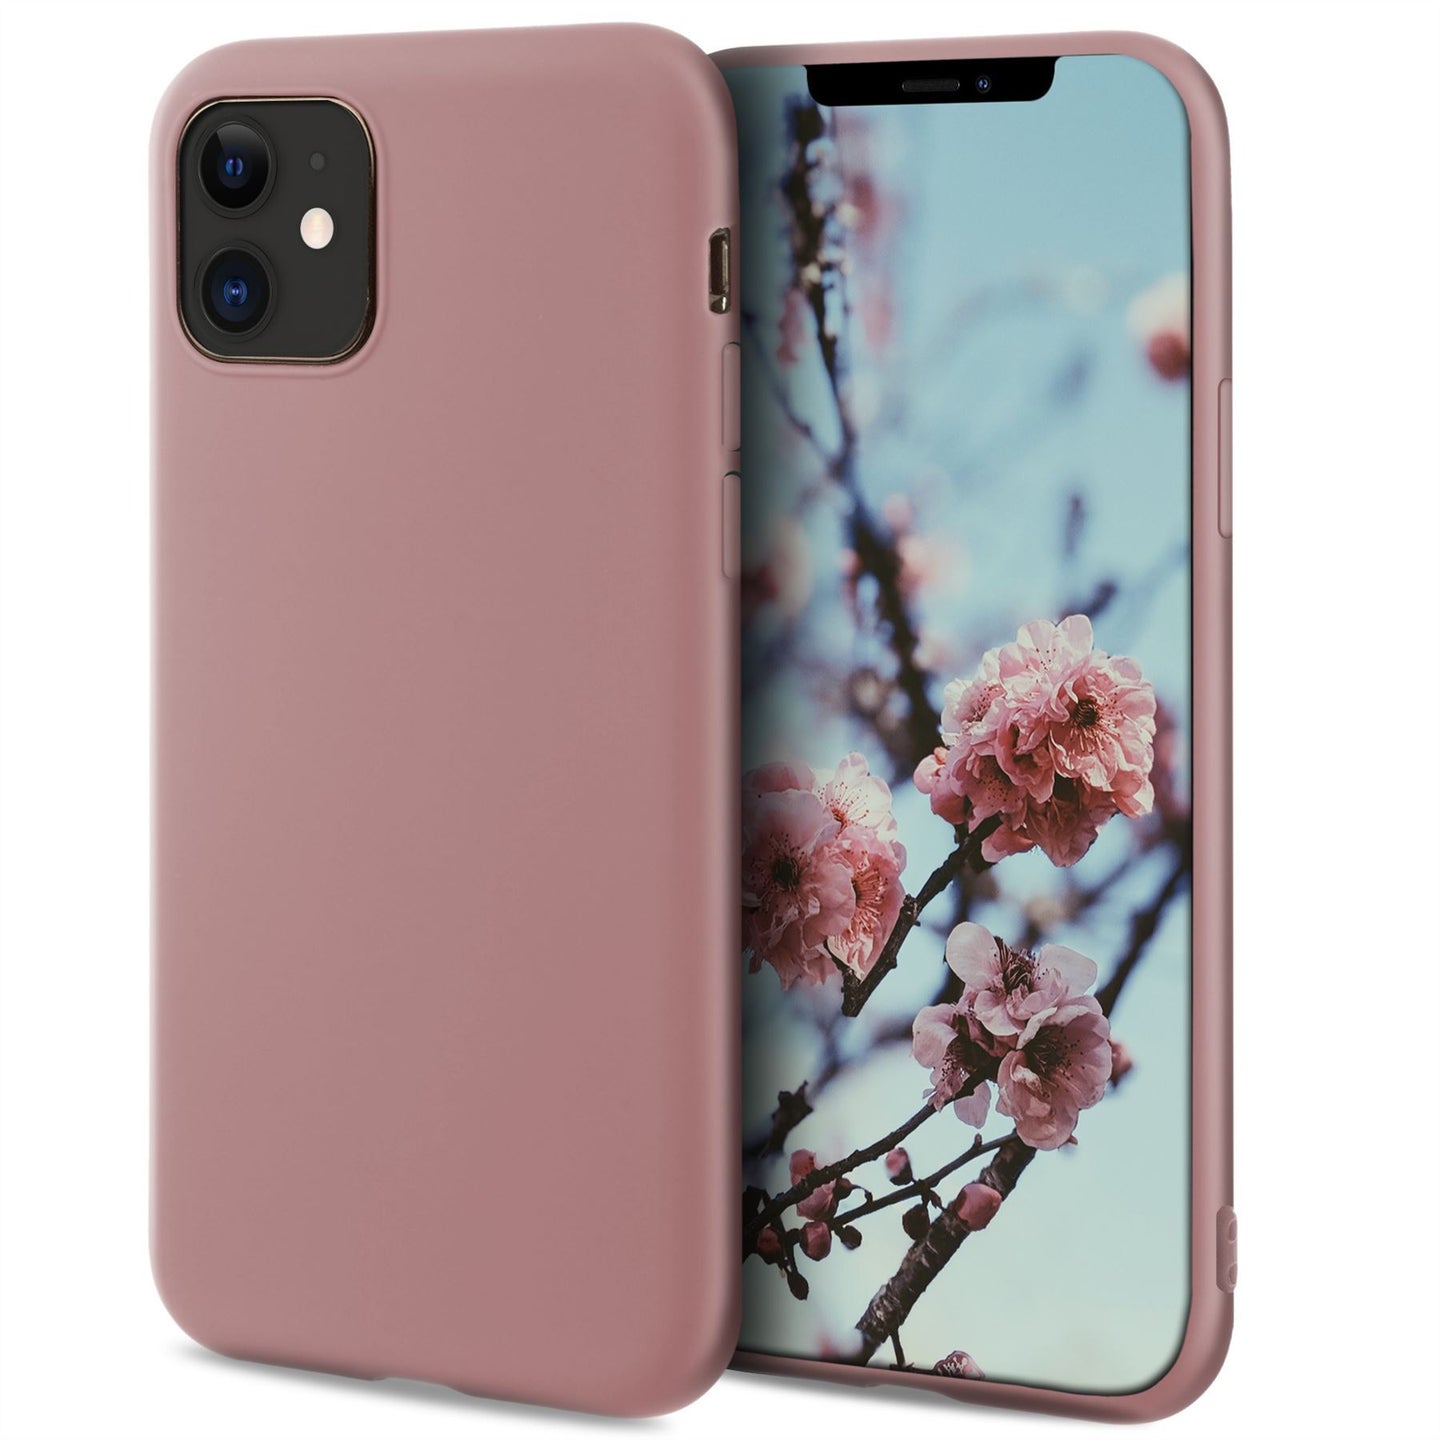 Moozy Minimalist Series Silicone Case for iPhone 11, Rose Beige - Matte Finish Slim Soft TPU Cover